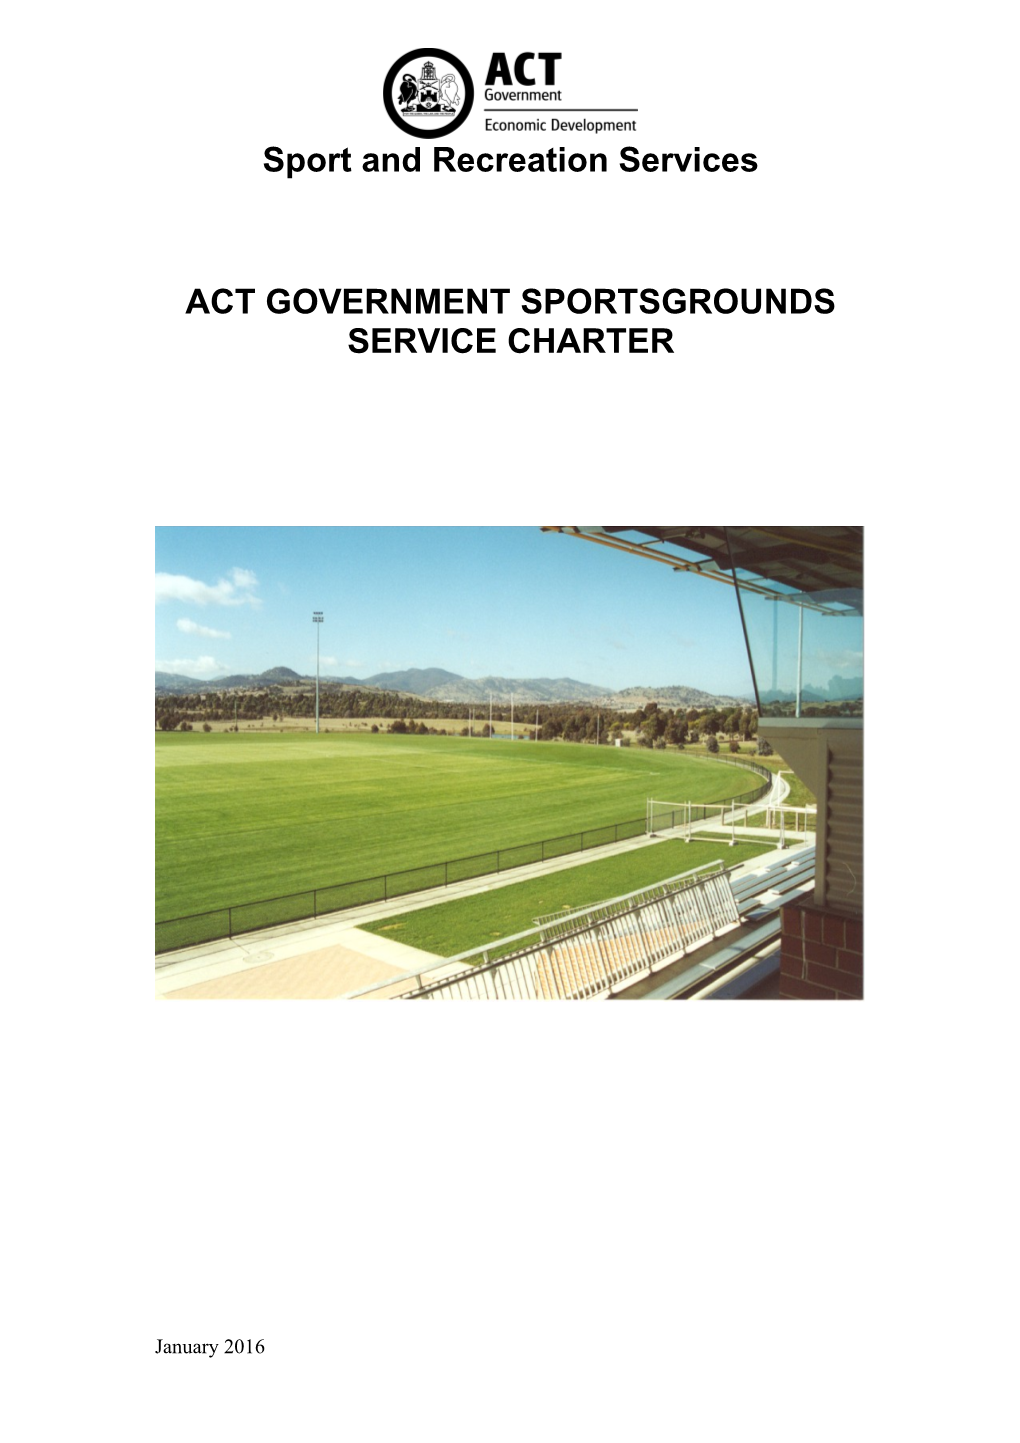 ACT Government Sportsgrounds Service Charter